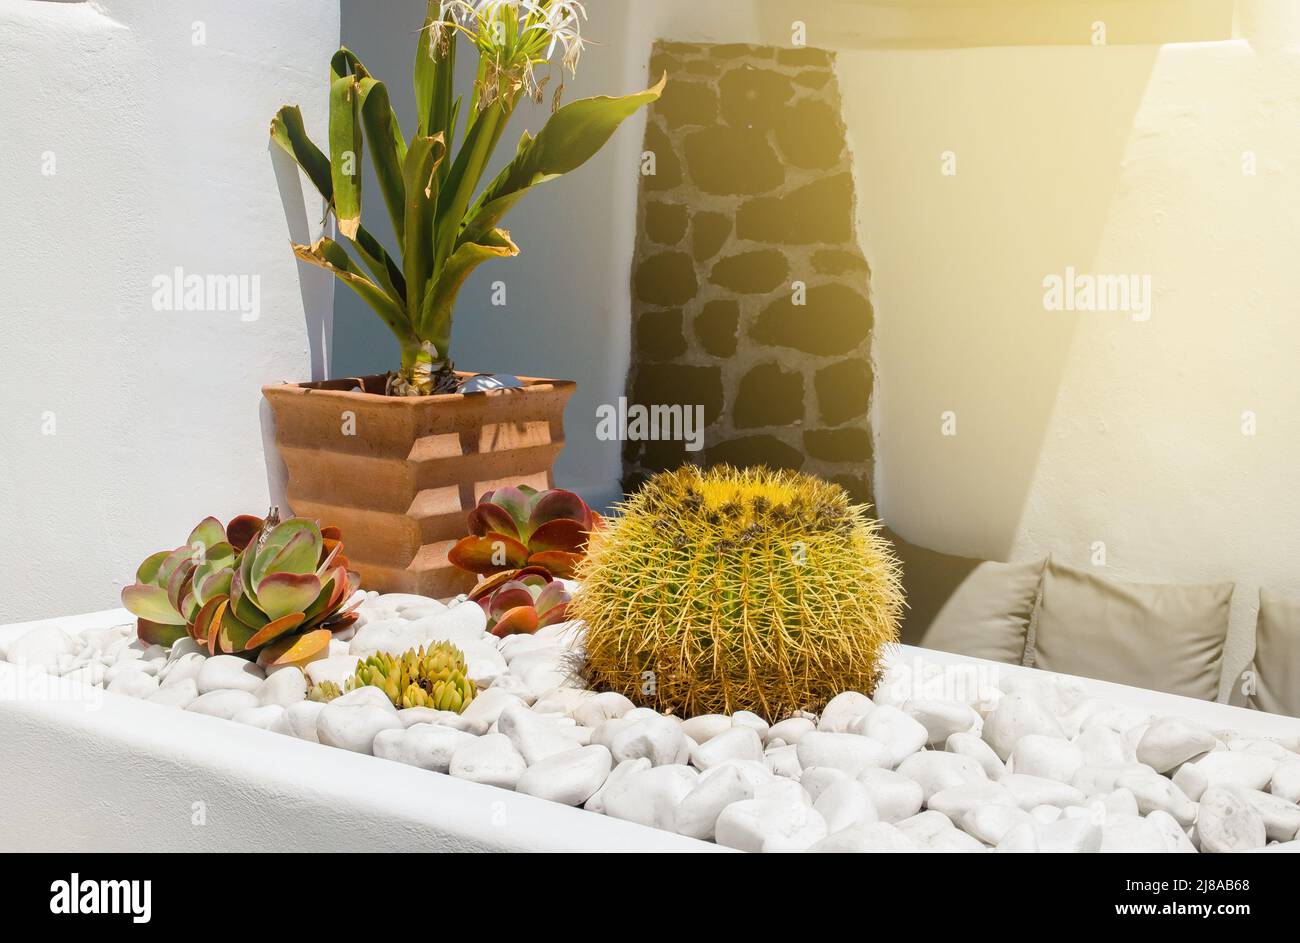 Various real cacti in Mediterranean home garden in hot climate with white decorative stones. Big ball shape is Barrel cactus. Stock Photo